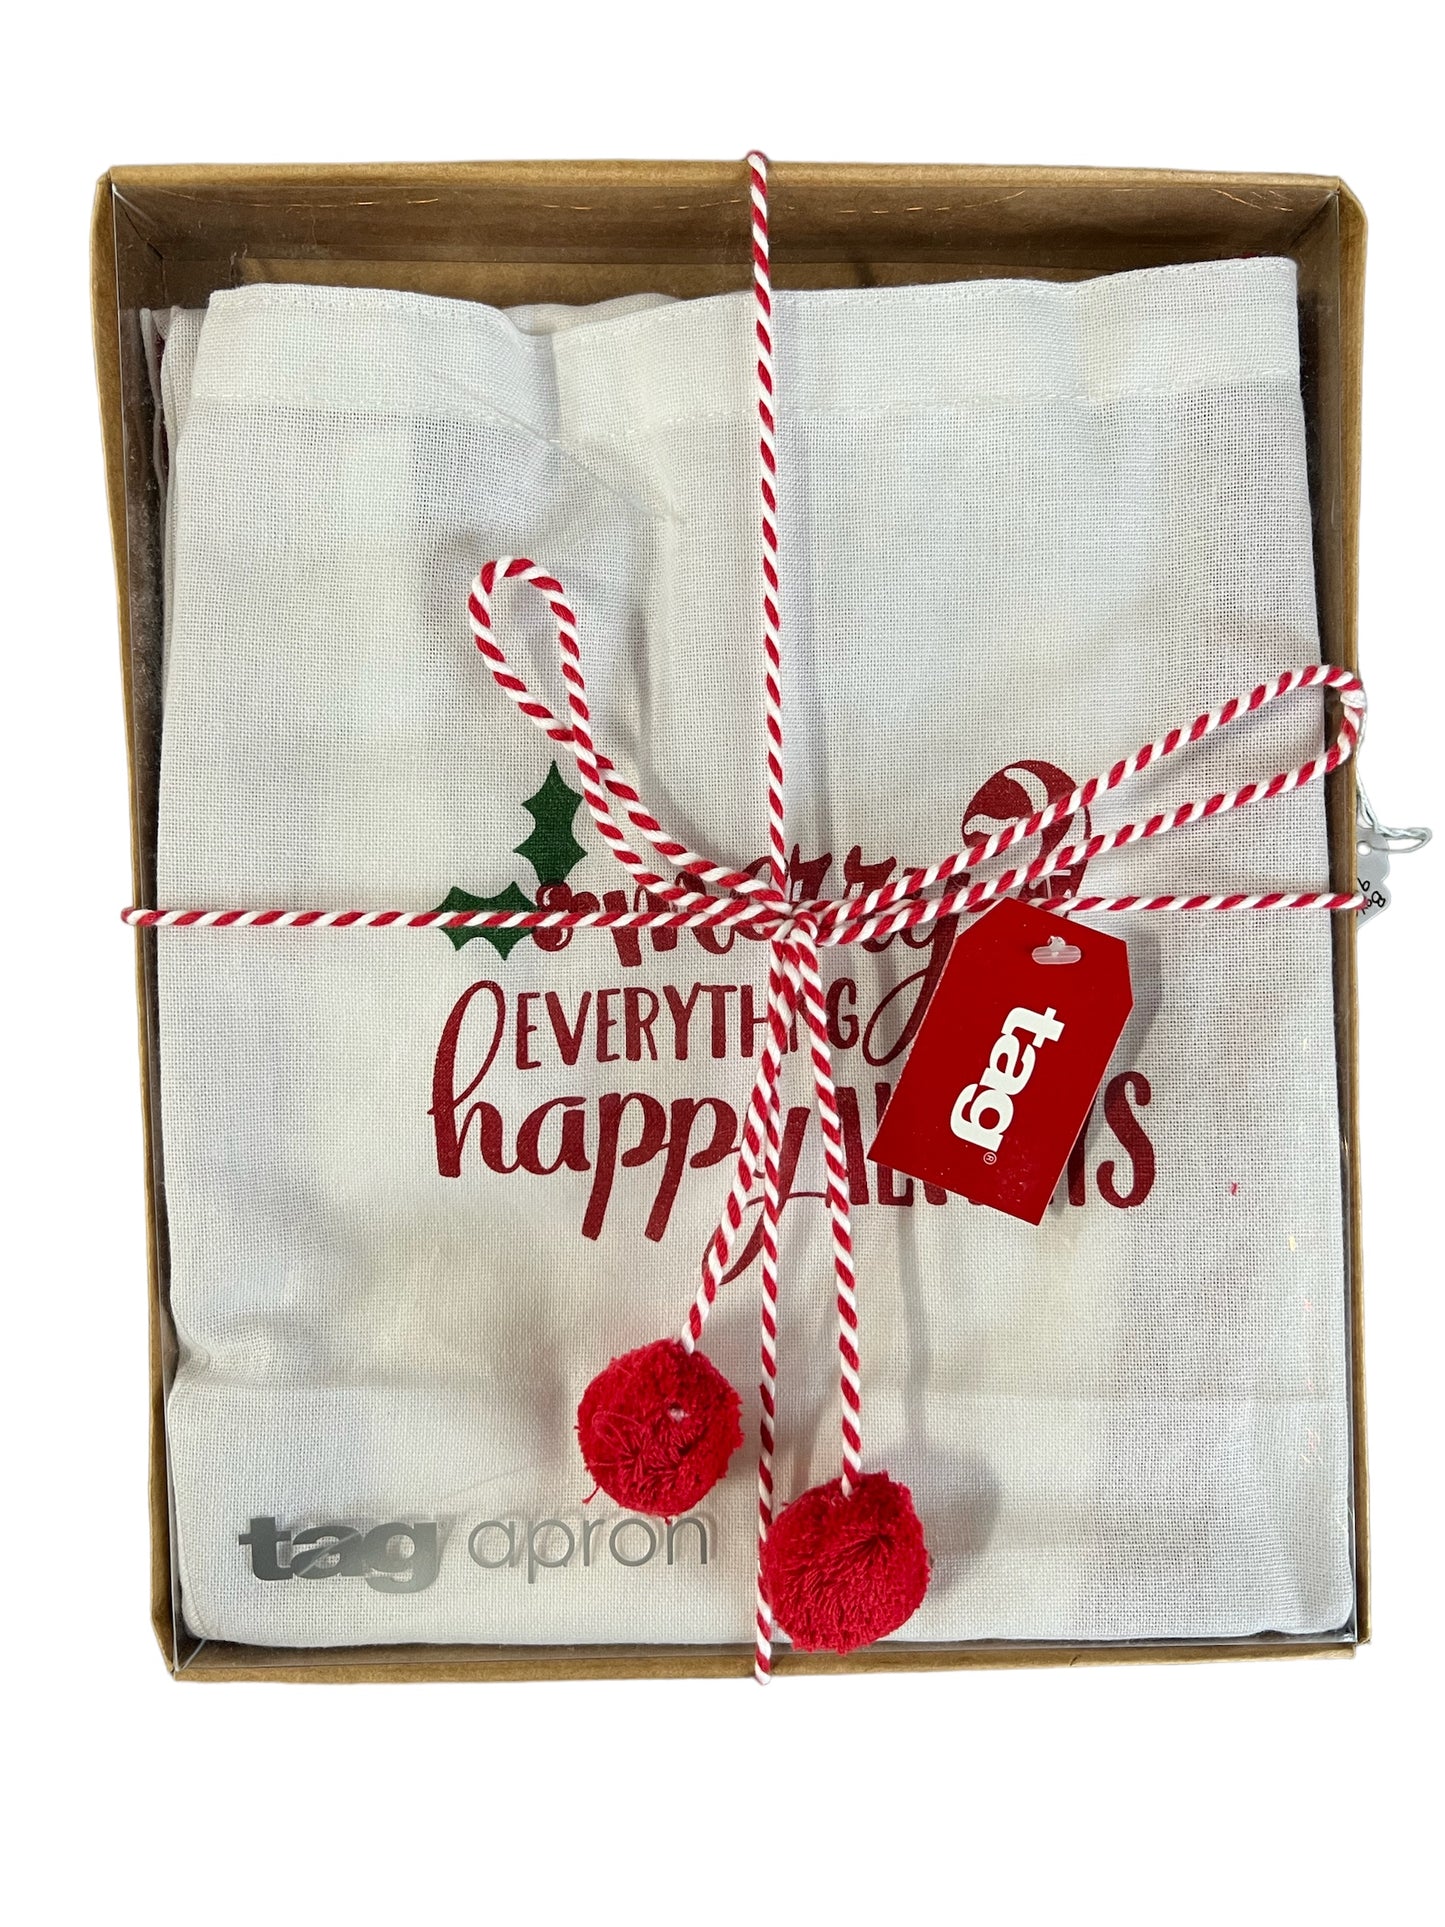 Merry Everything Happy Always Red & White Apron with pockets